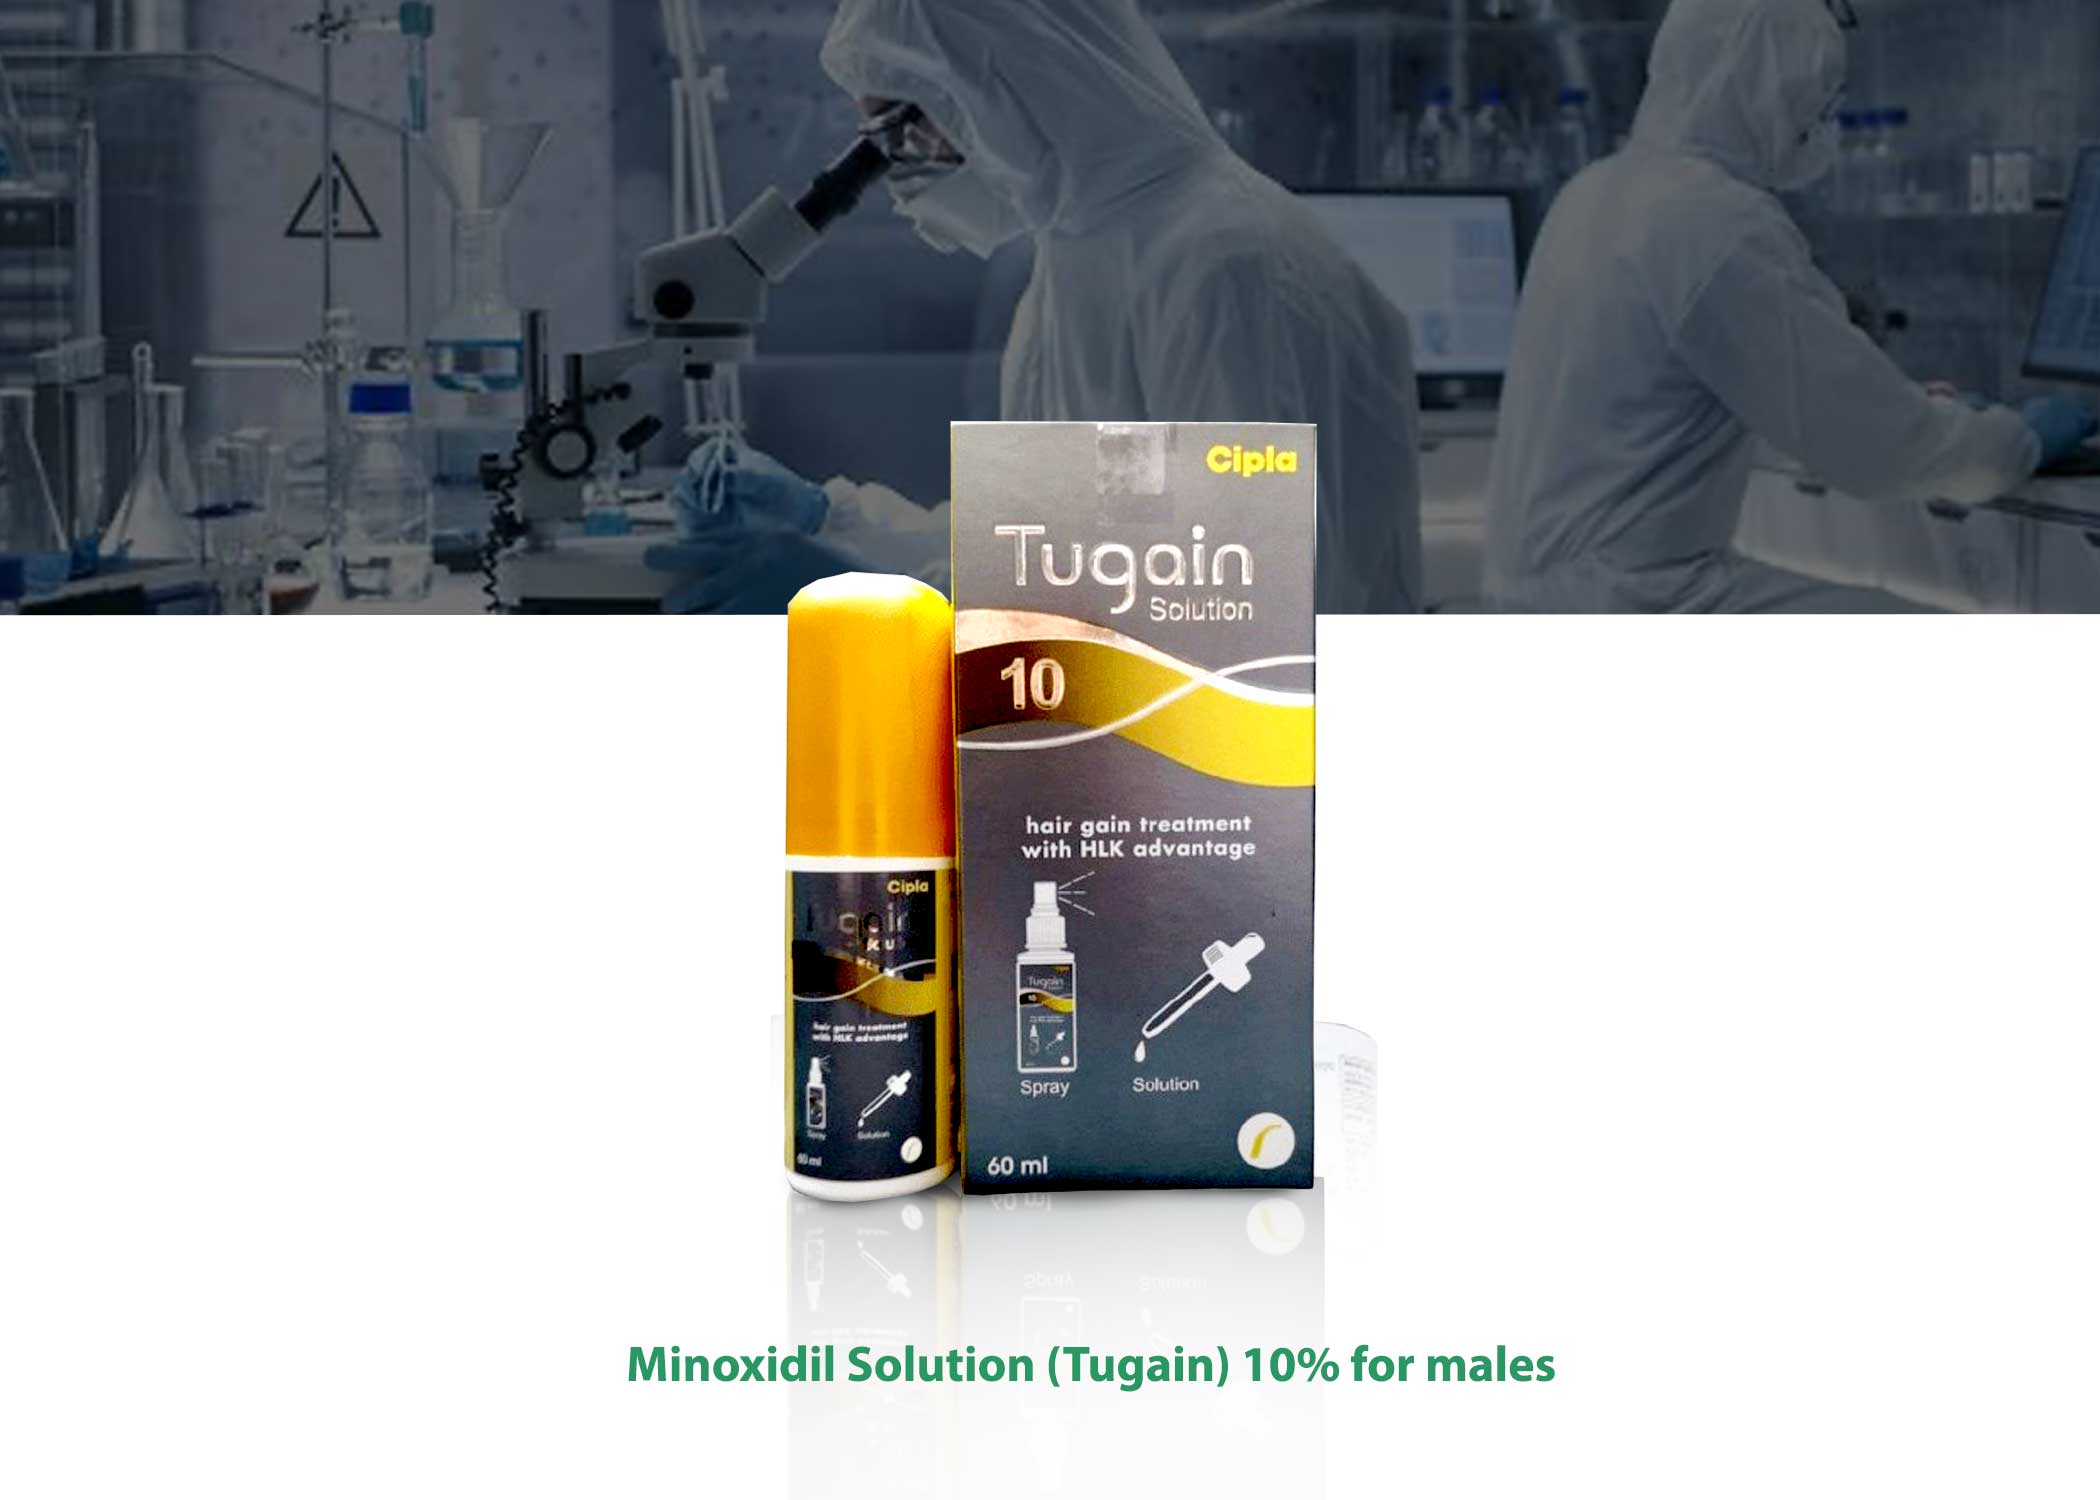 Minoxidil Solution Tugain 10 for males